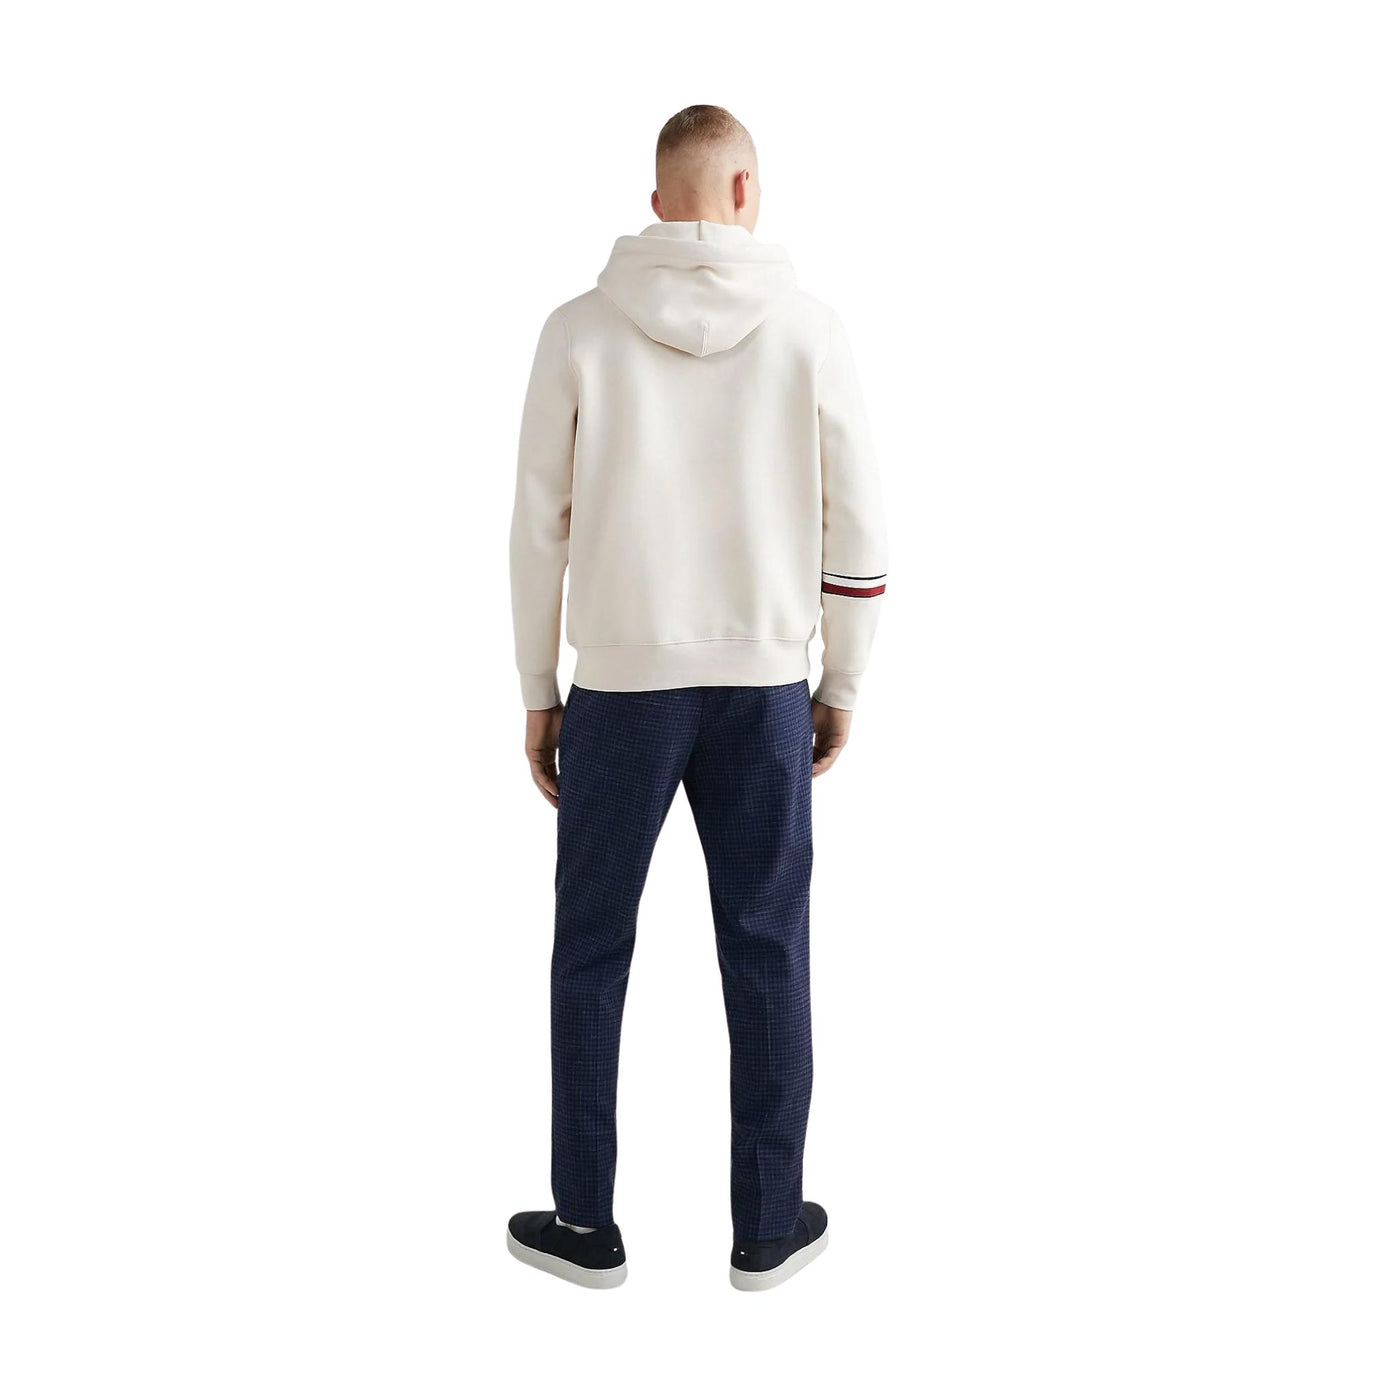 Men's sweatshirt with contrasting band on the sleeve